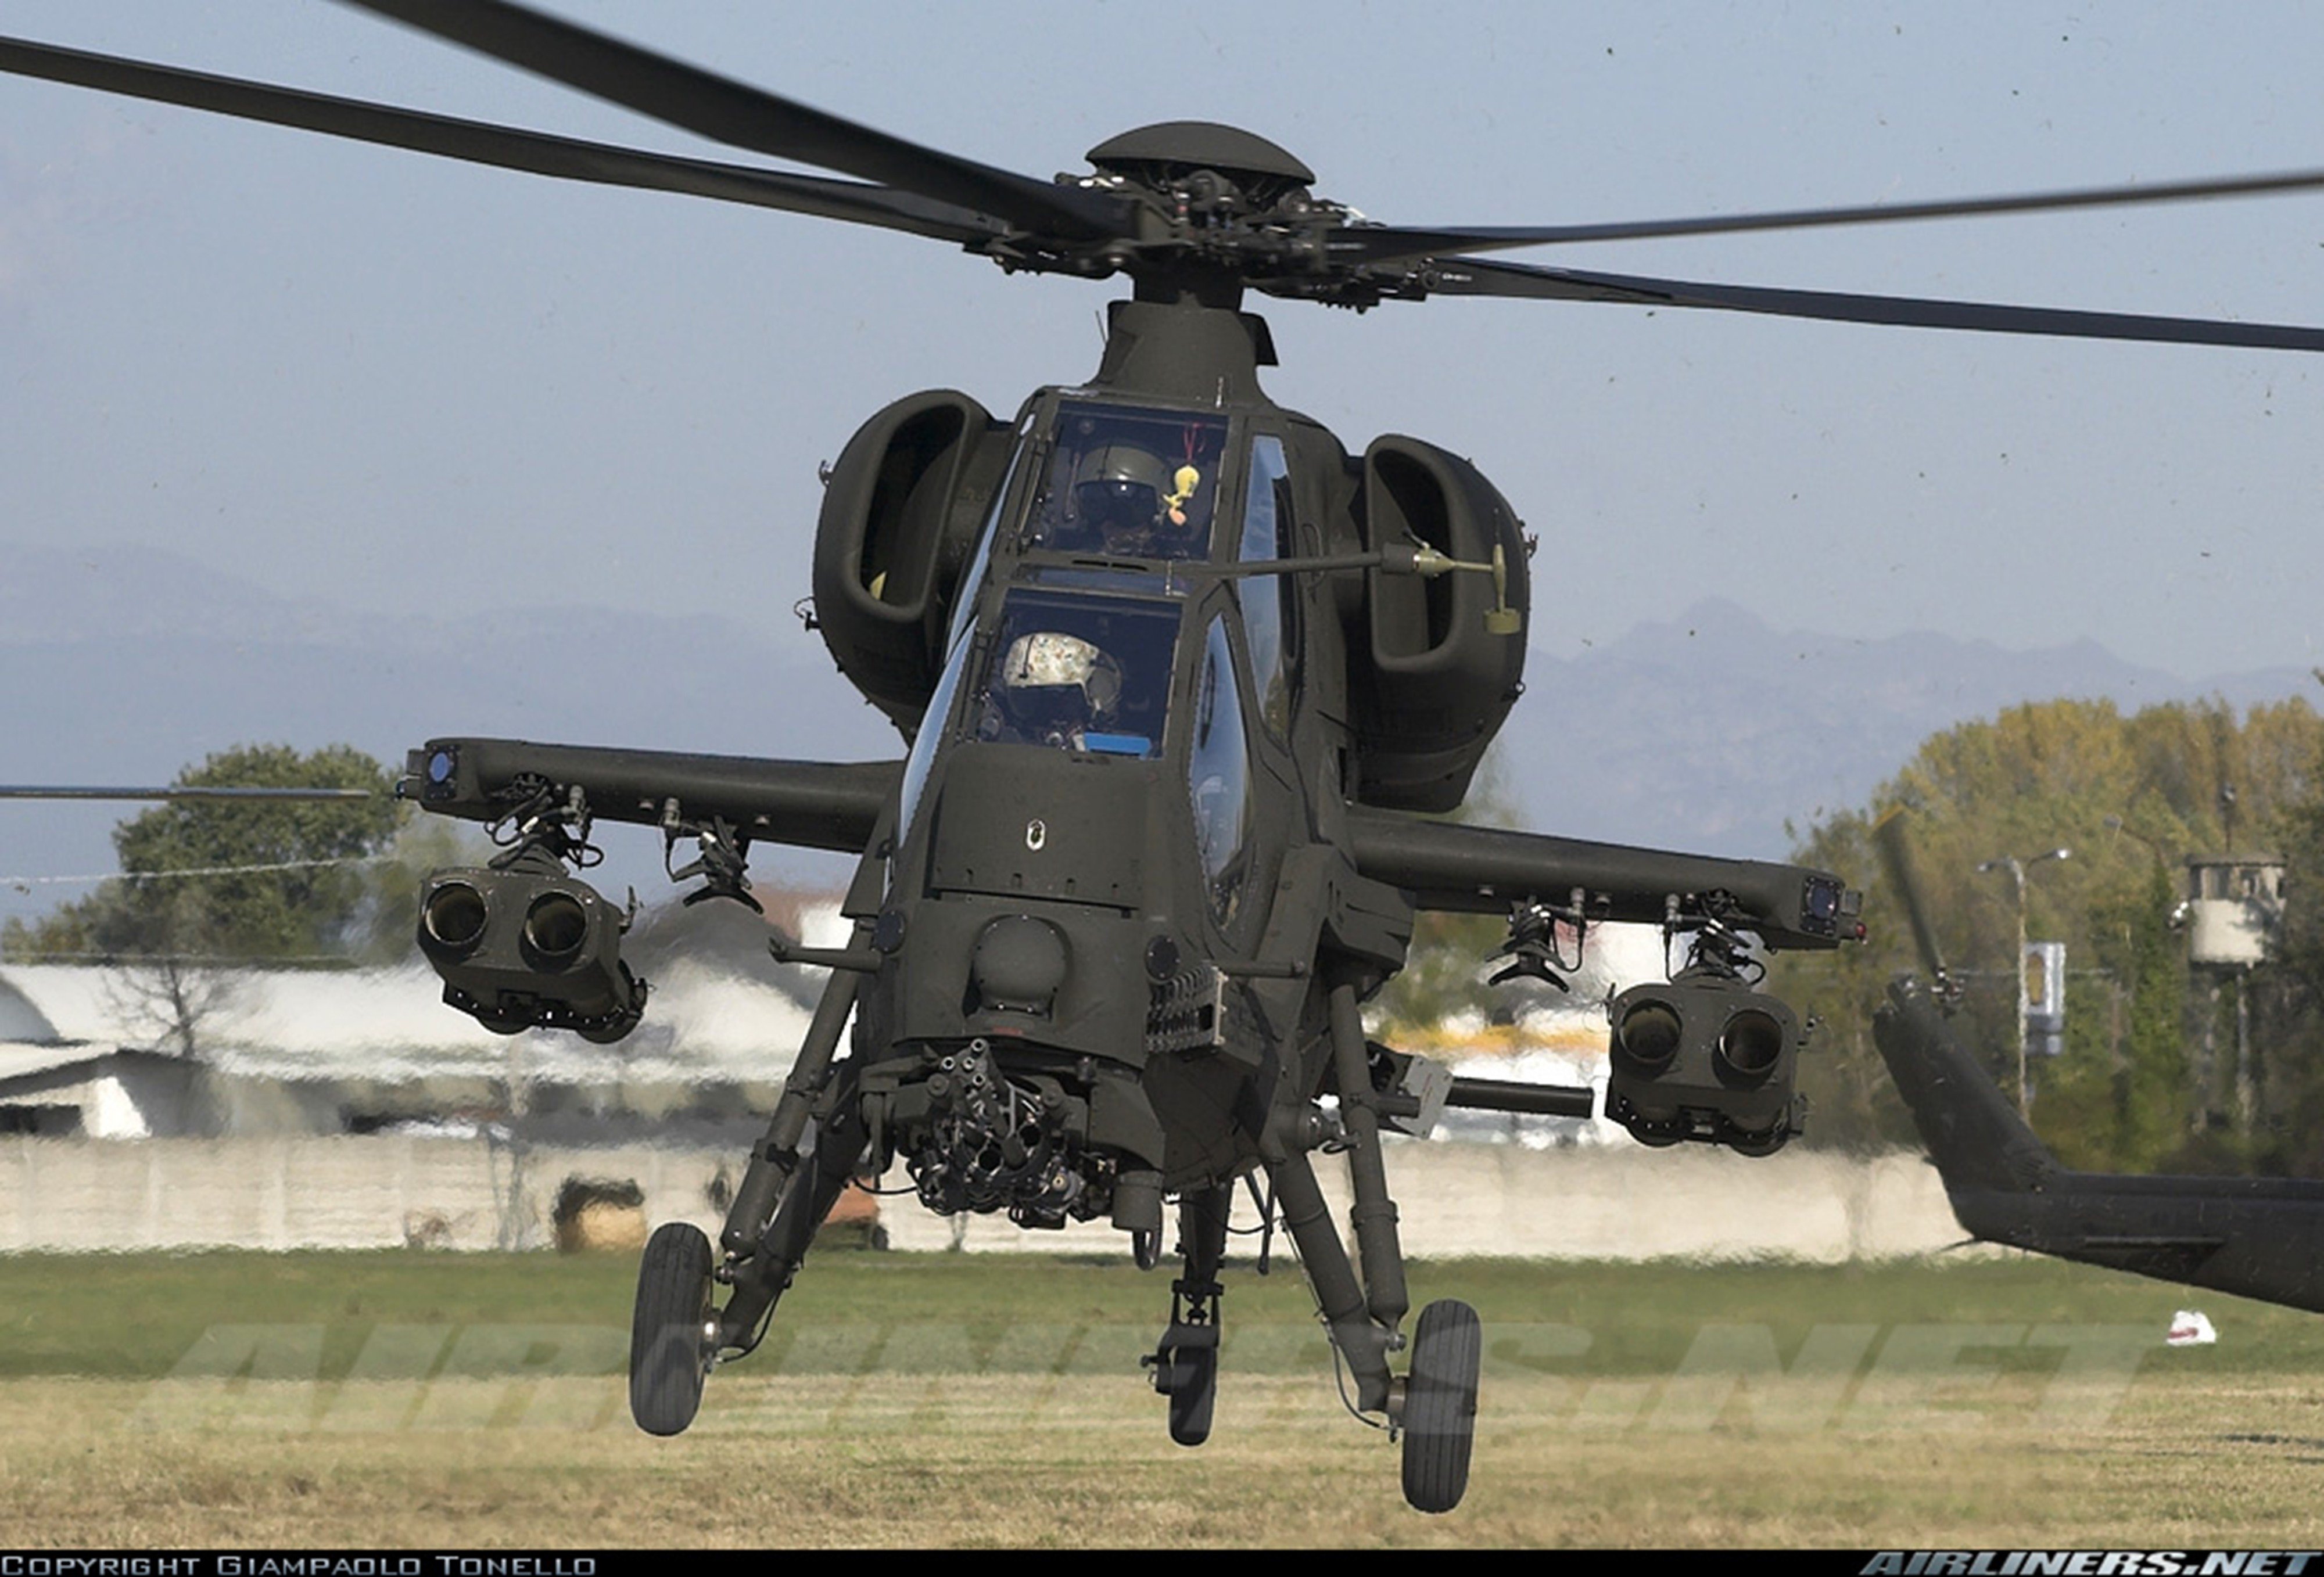 helicopter, Aircraft, Vehicle, Military, Army, Attack, Agusta, A129, Mangusta, Italy Wallpaper